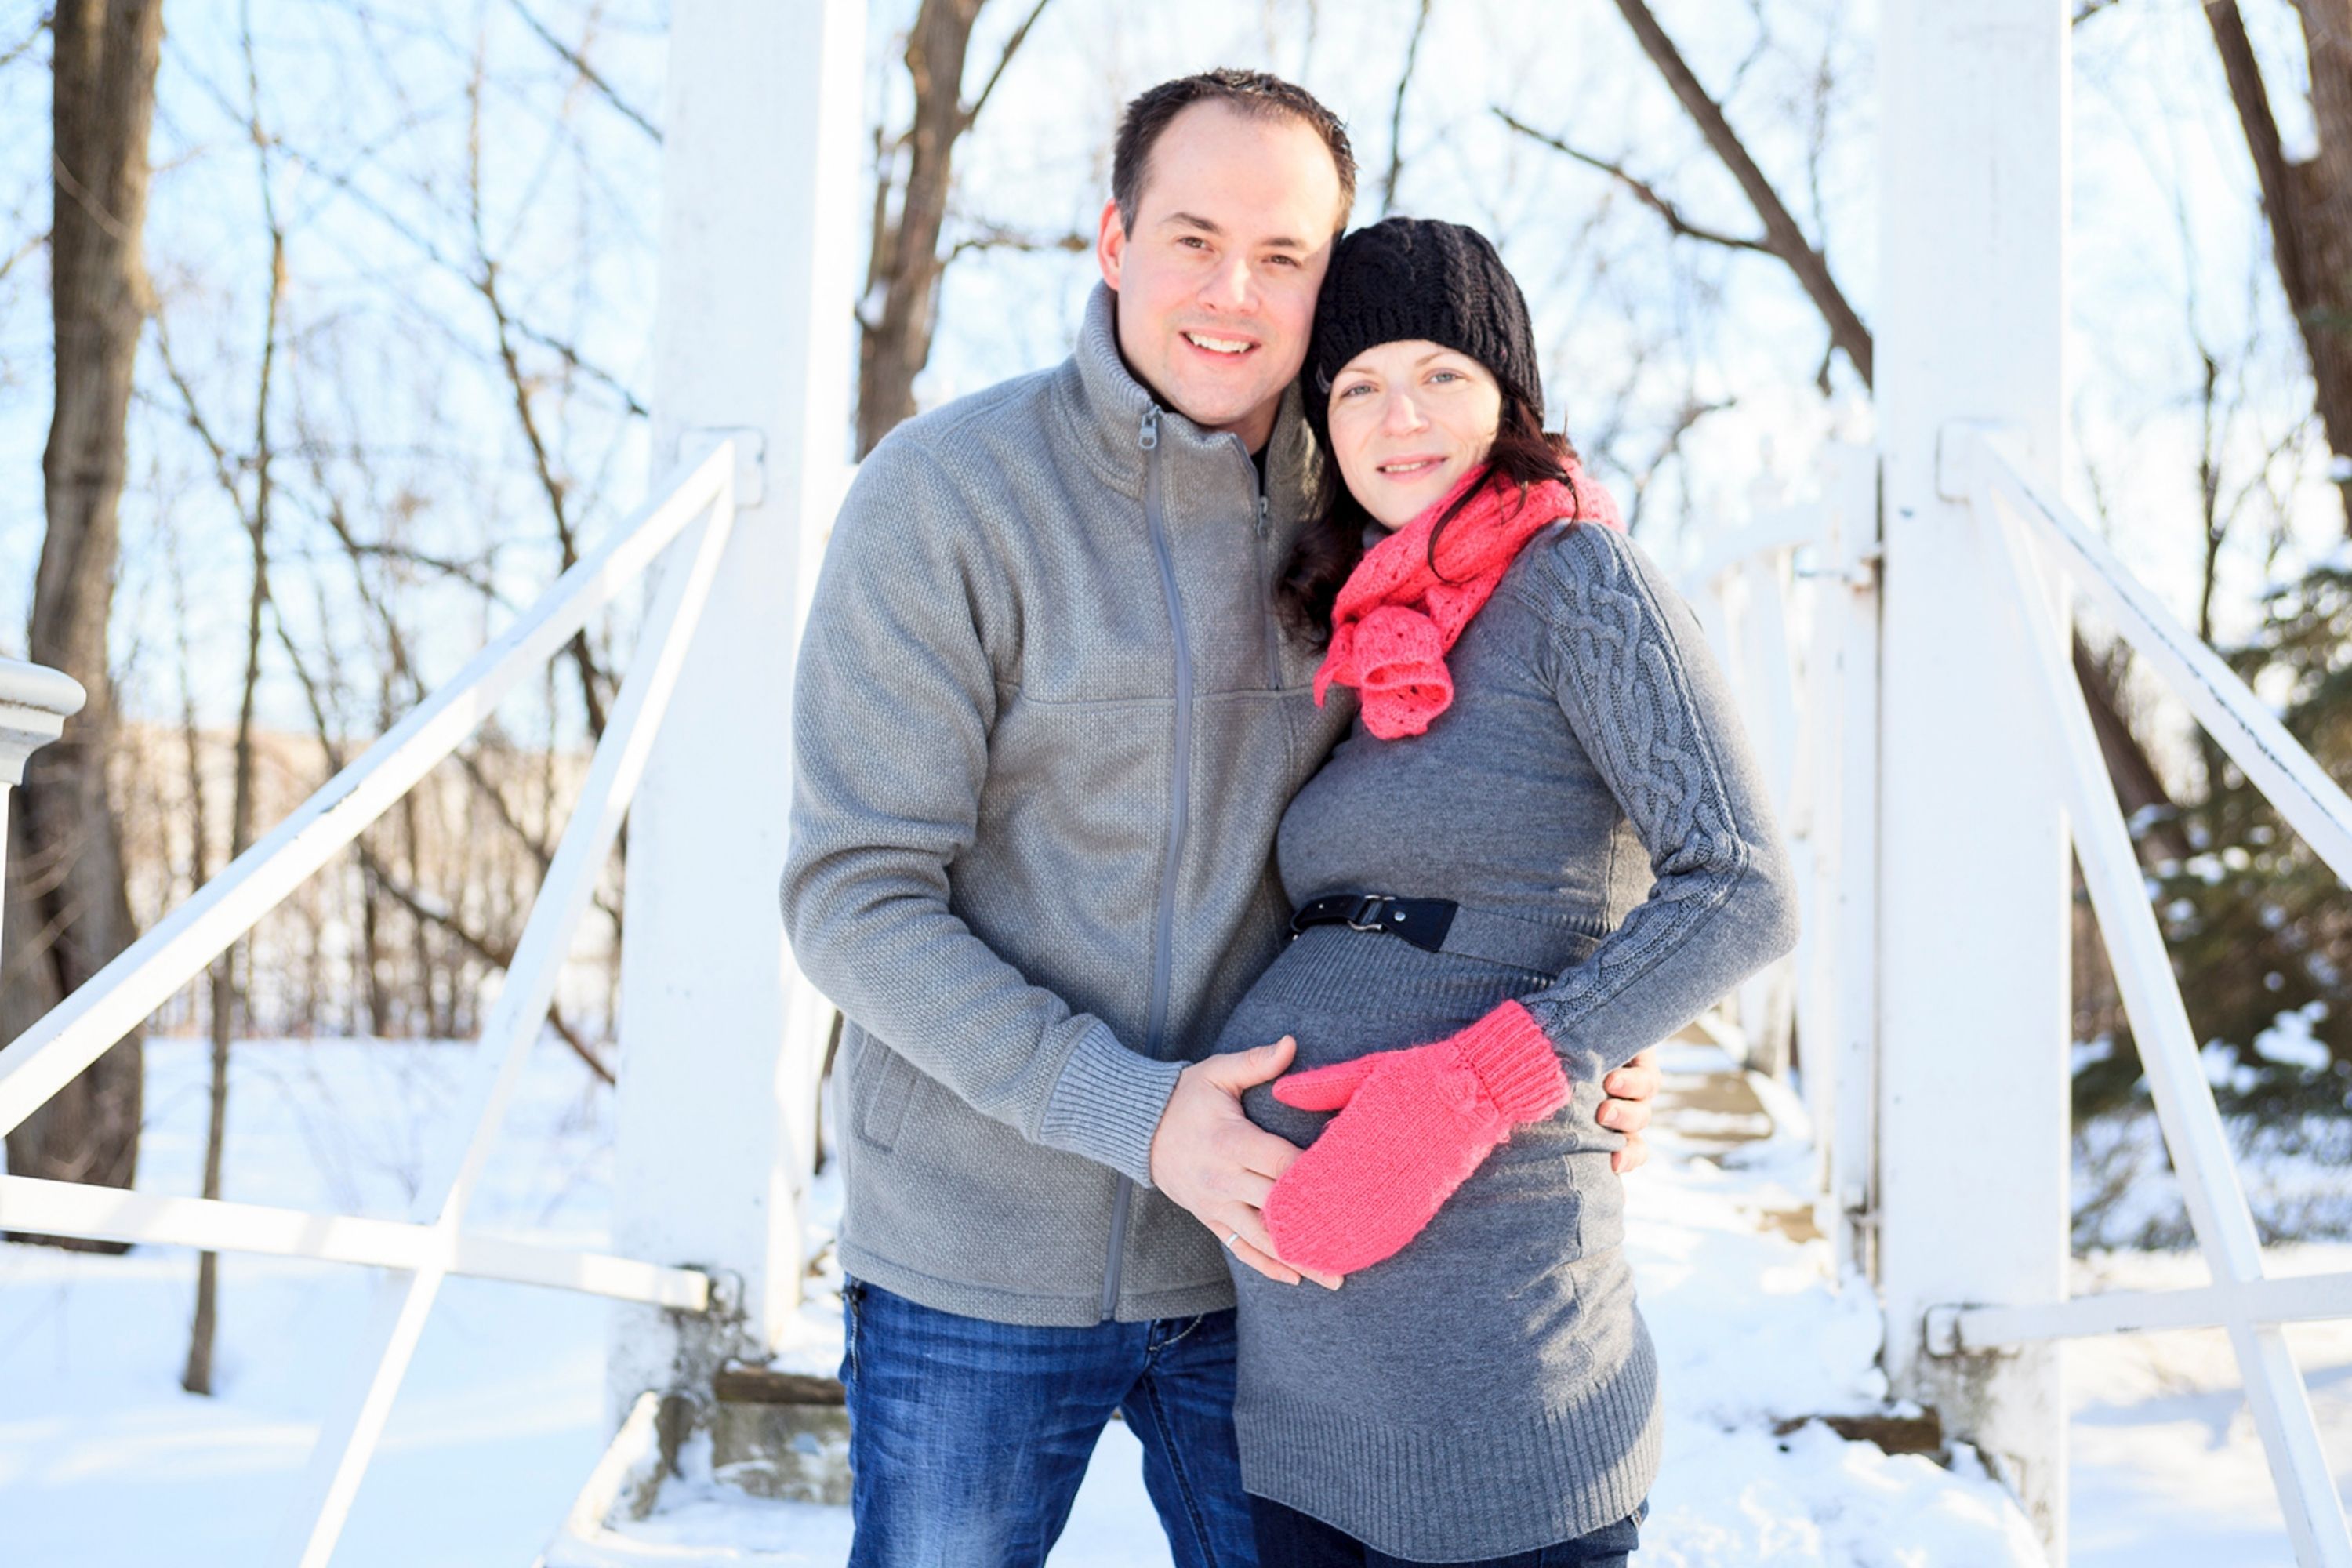 Winter Photoshoot Outfit Ideas For Pregnant Women